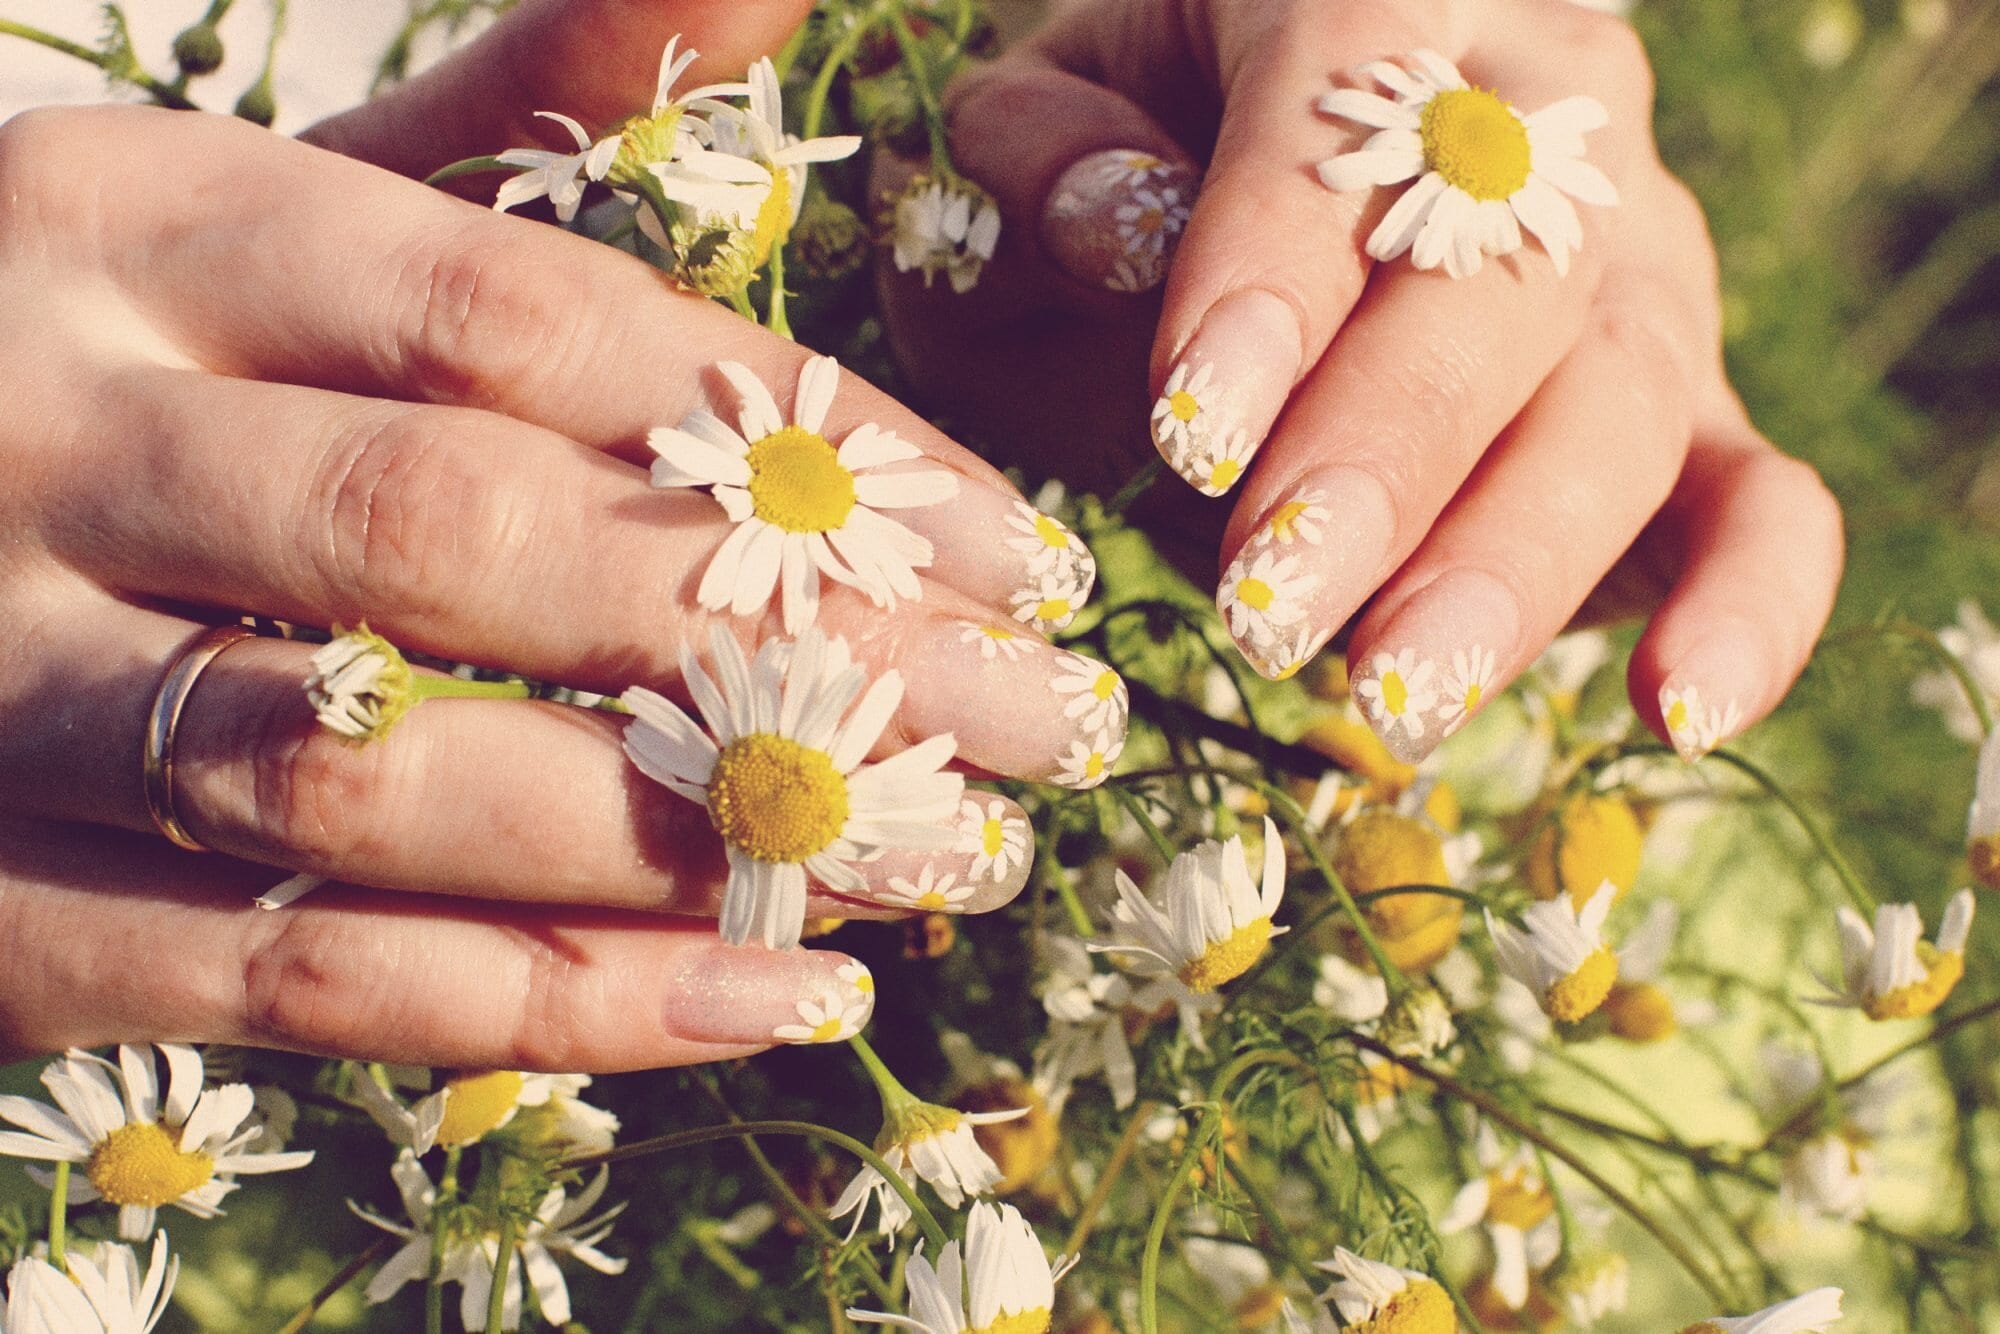 Daisy Nail Art Is the Easiest Summer Manicure to DIY At Home